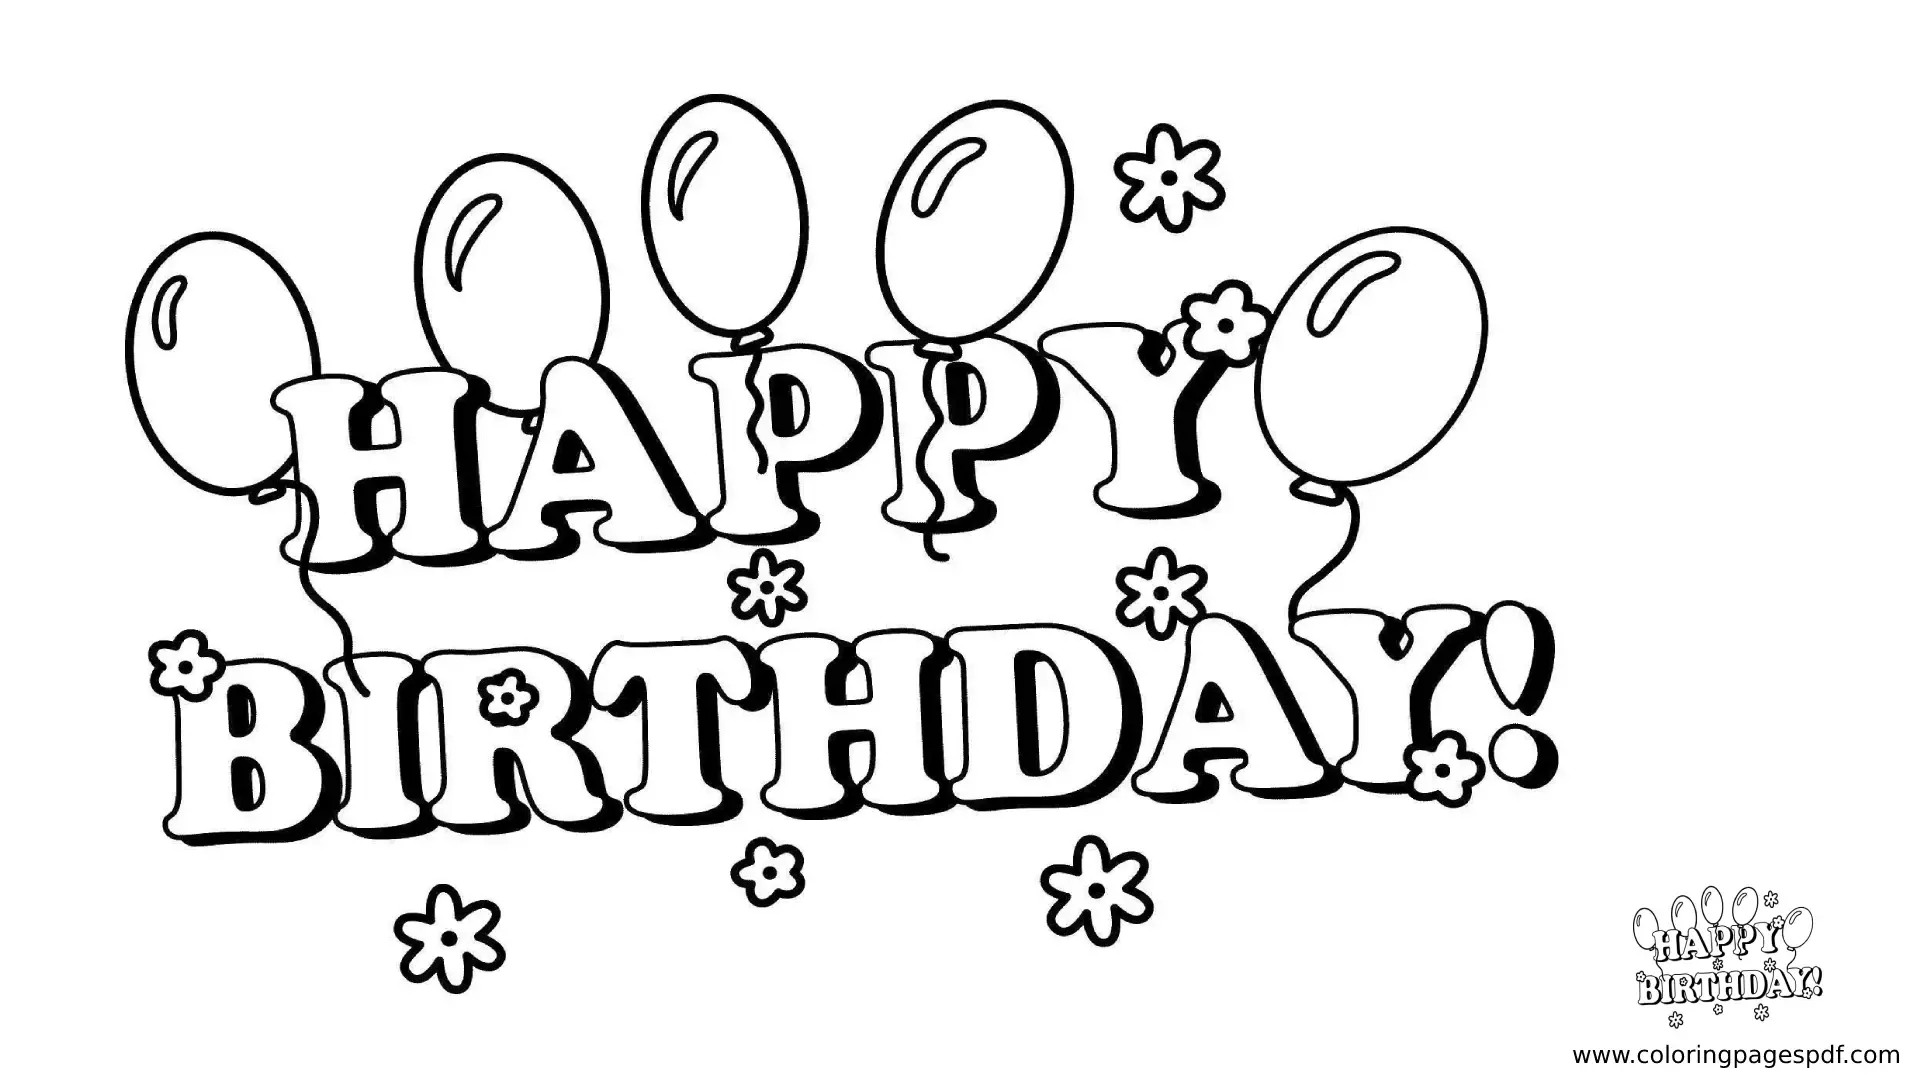 Coloring Pages Of Happy Birthday With Flowers And Balloons